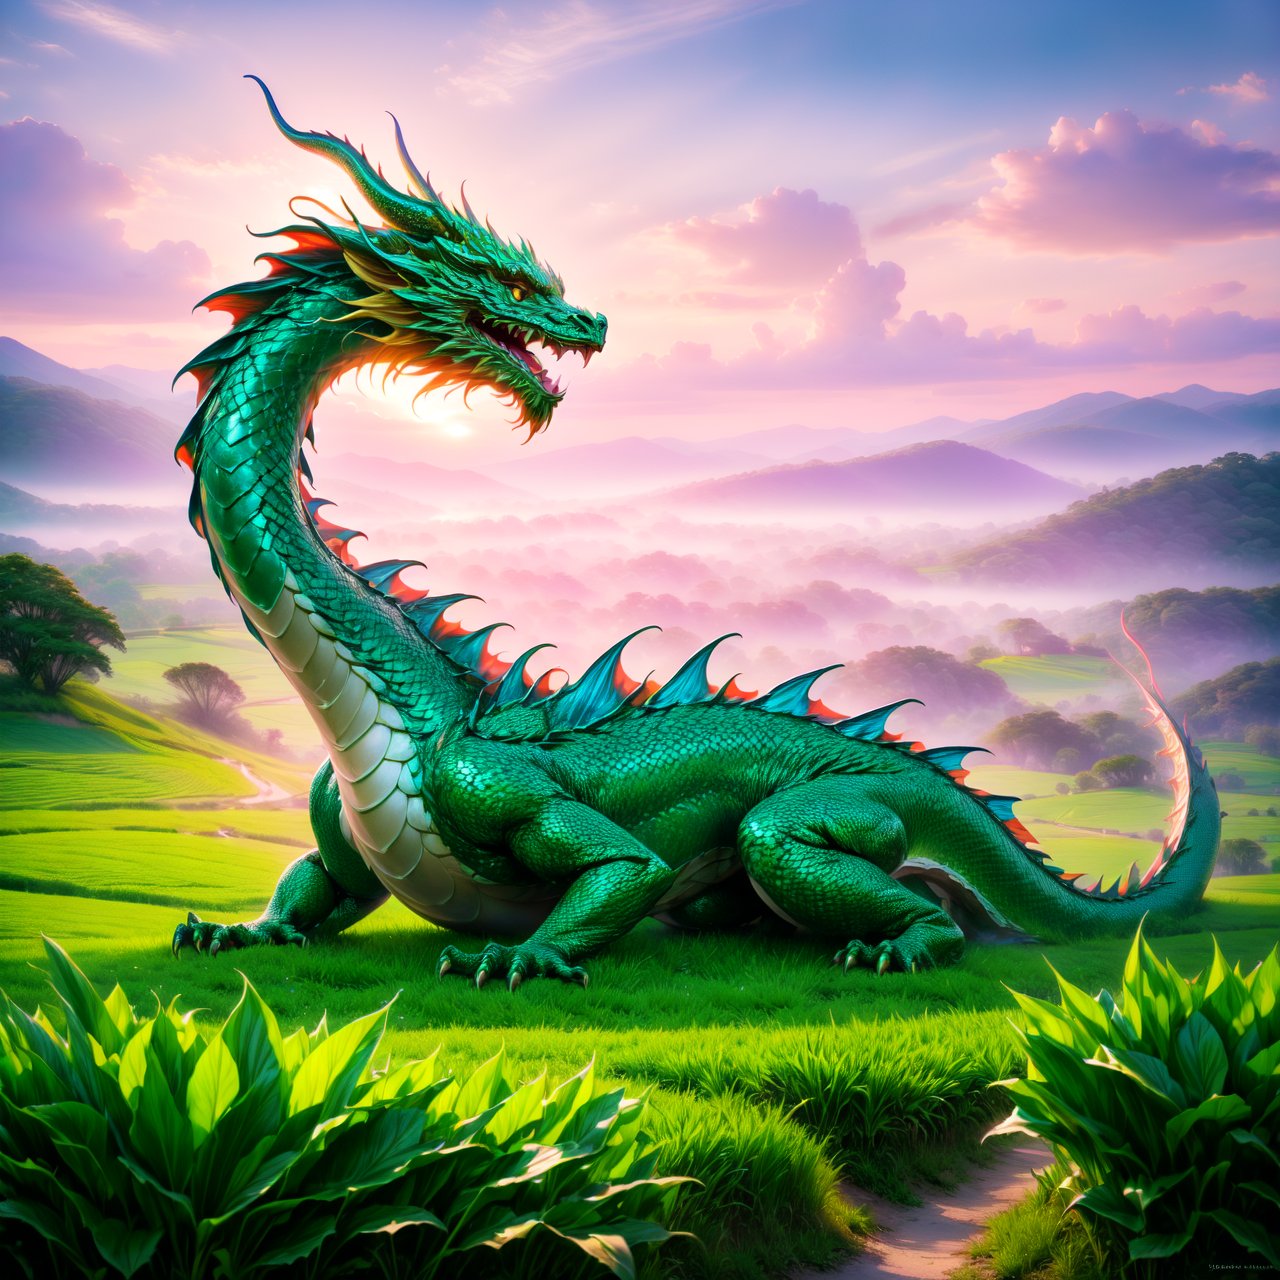 An impactful and vivid portrayal of 'The dragon appearing in the field' (见龙在田), emphasizing the image of a traditional Chinese dragon. The dragon, with its intricate scales and majestic form, is partially emerging from a lush, verdant field, symbolizing the beginning of recognition and the potential coming to light. The dragon's presence is commanding and awe-inspiring, with its body gracefully winding and its eyes conveying wisdom and power. The setting is a vibrant and fertile field, suggesting the dragon's emerging influence and the start of its ascent.
By FuturEvoLab, (Masterpiece, Best Quality, 8k:1.2), (Ultra-Detailed, Highres, Extremely Detailed, Absurdres, Incredibly Absurdres, Huge Filesize:1.1), 